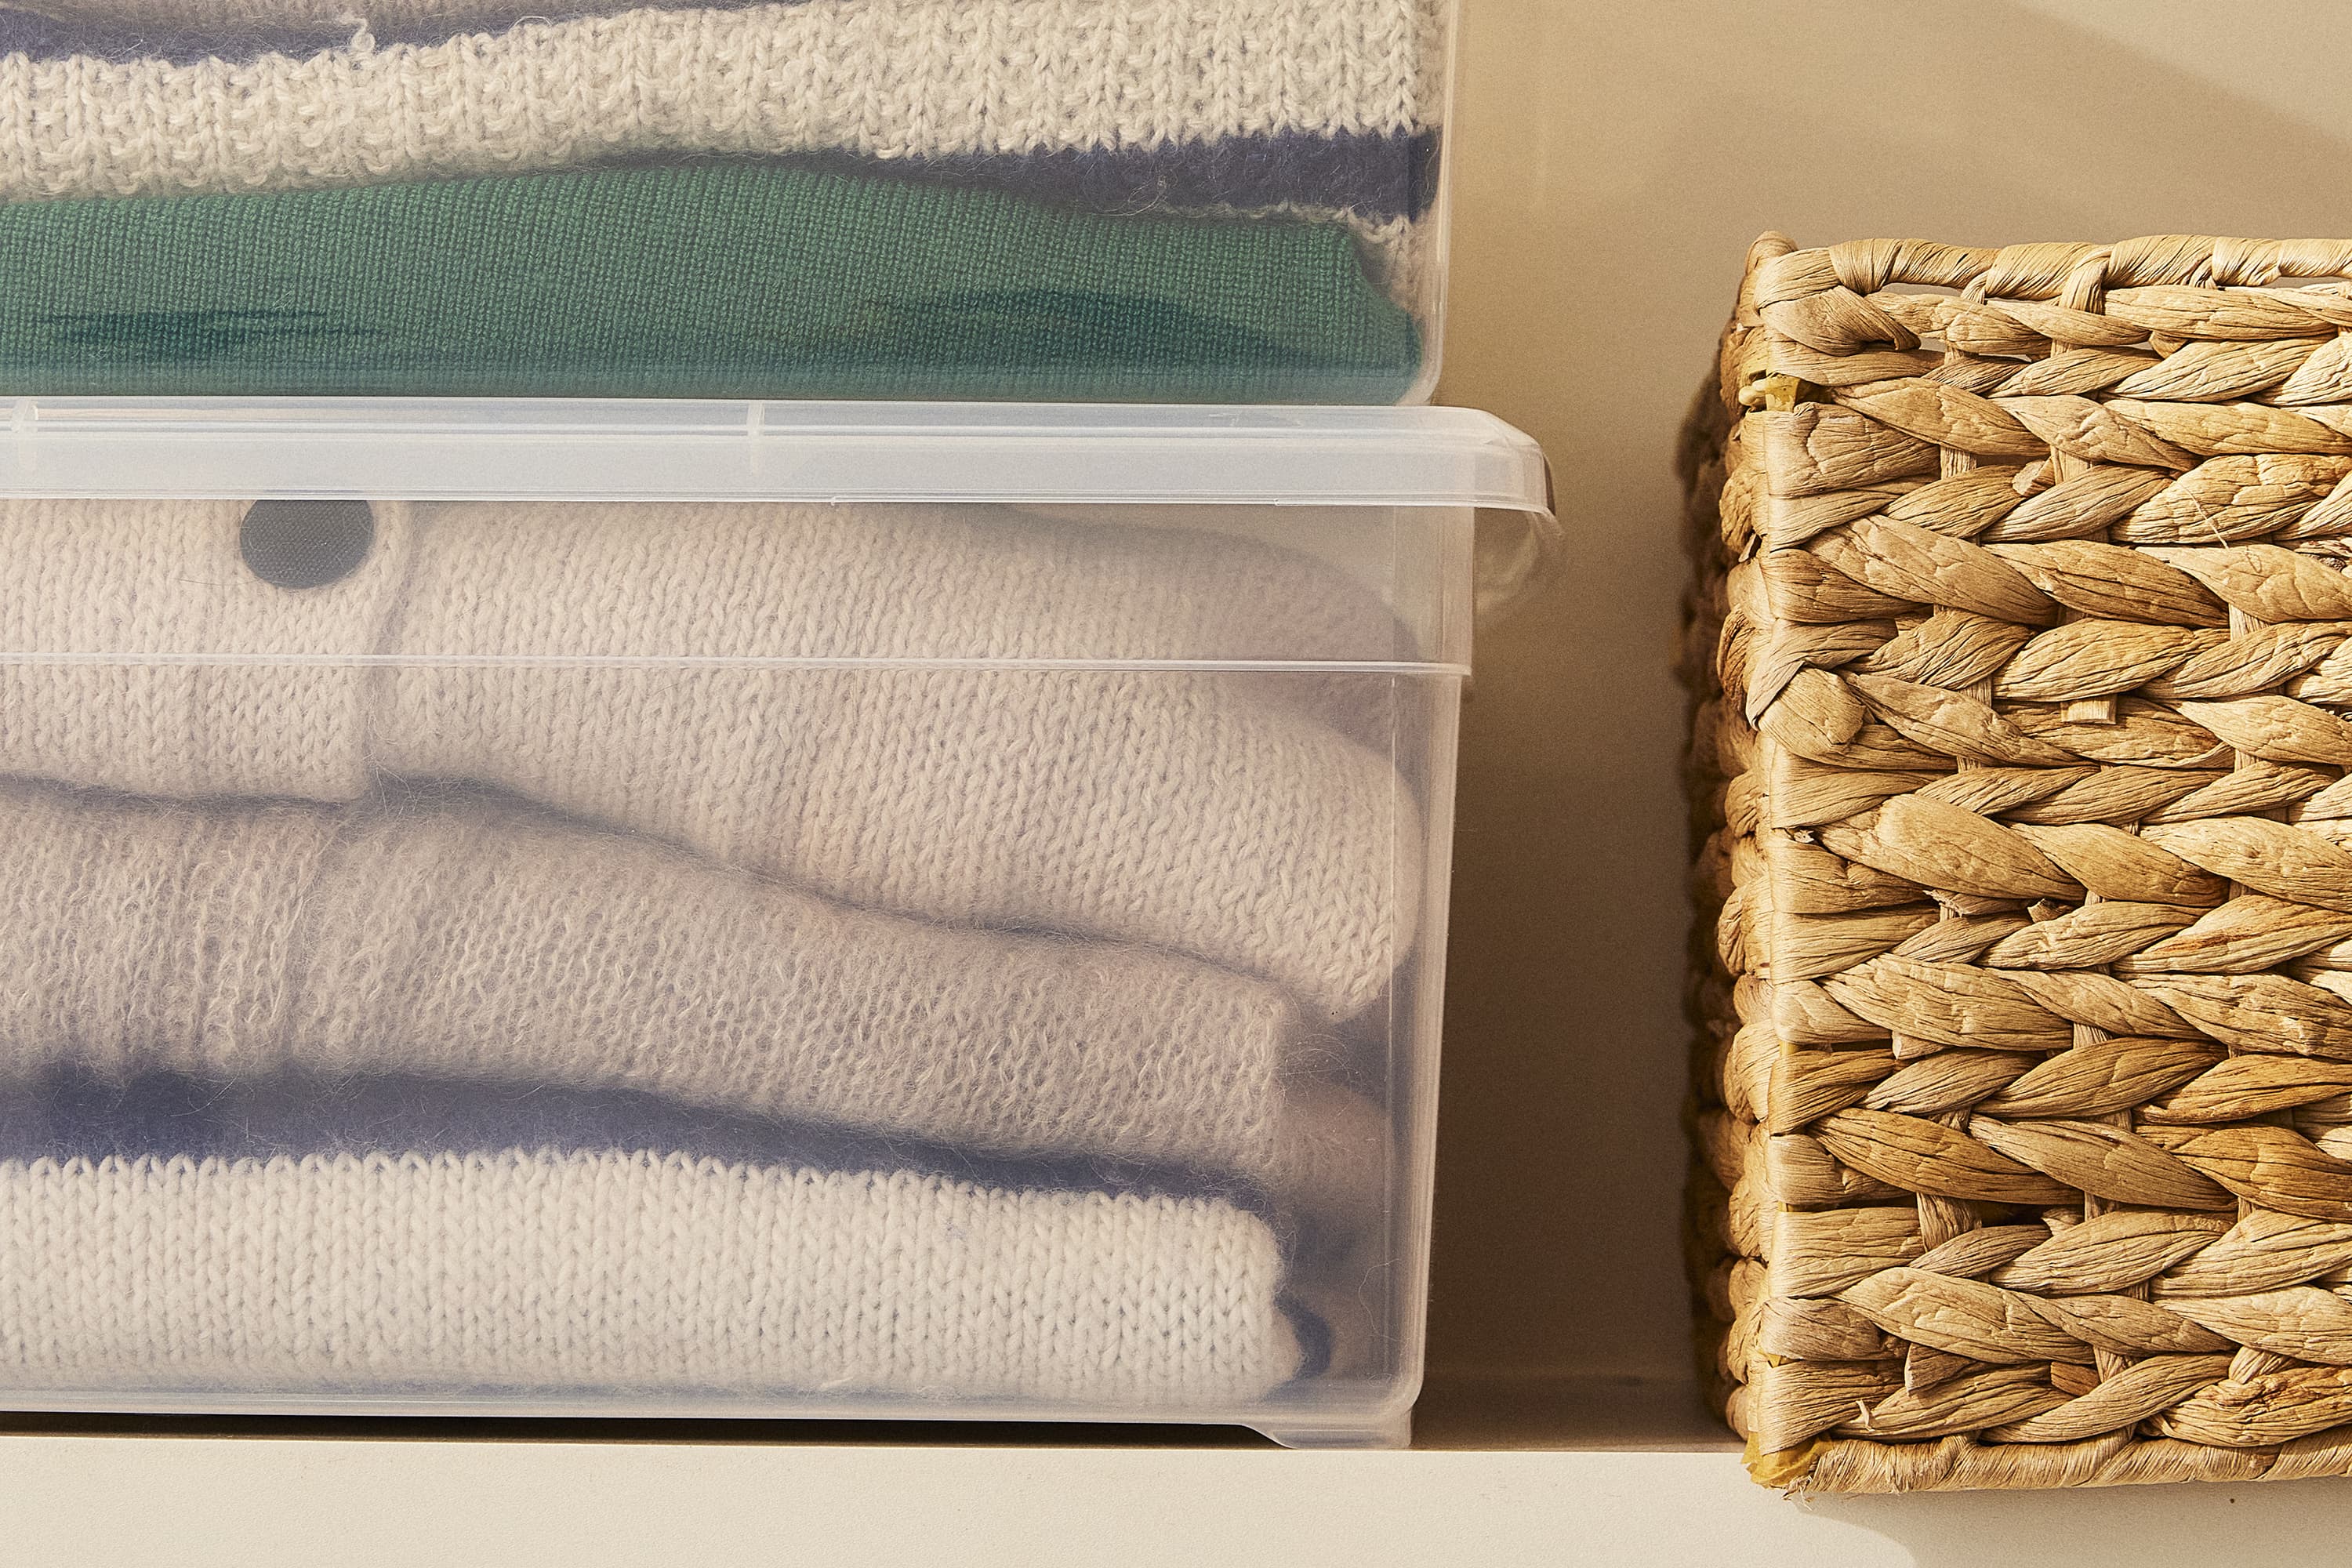 Where to Find Cute Inexpensive Storage Baskets - Organizing Moms